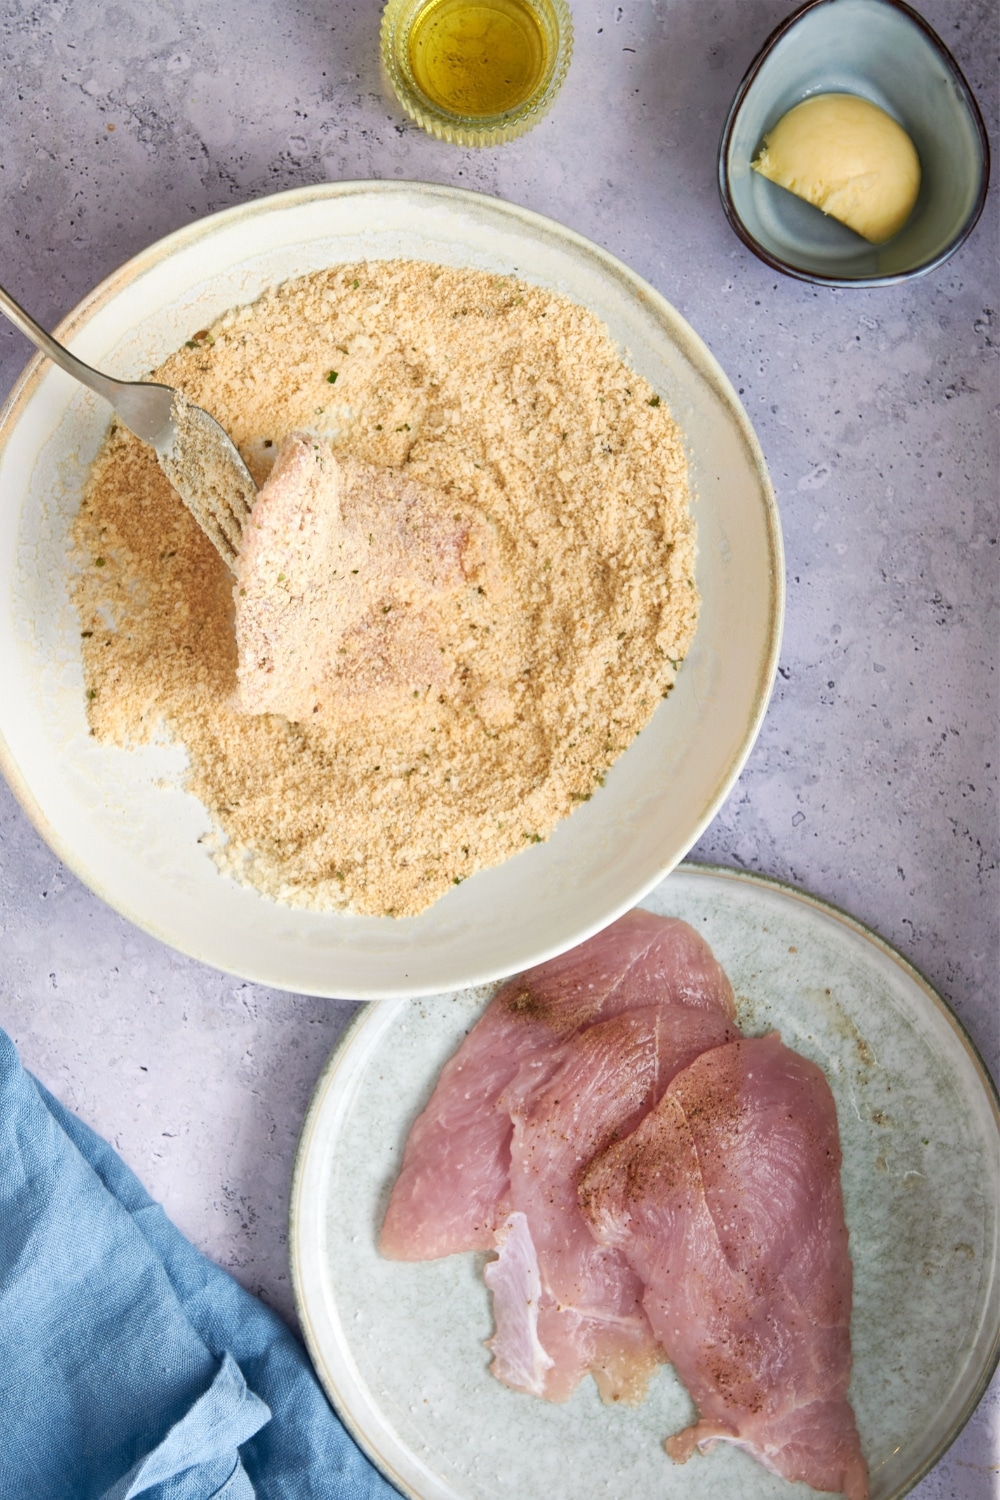 Coating turkey cutlets in a shallow bowl of seasoned parmesan and breadcrumbs.